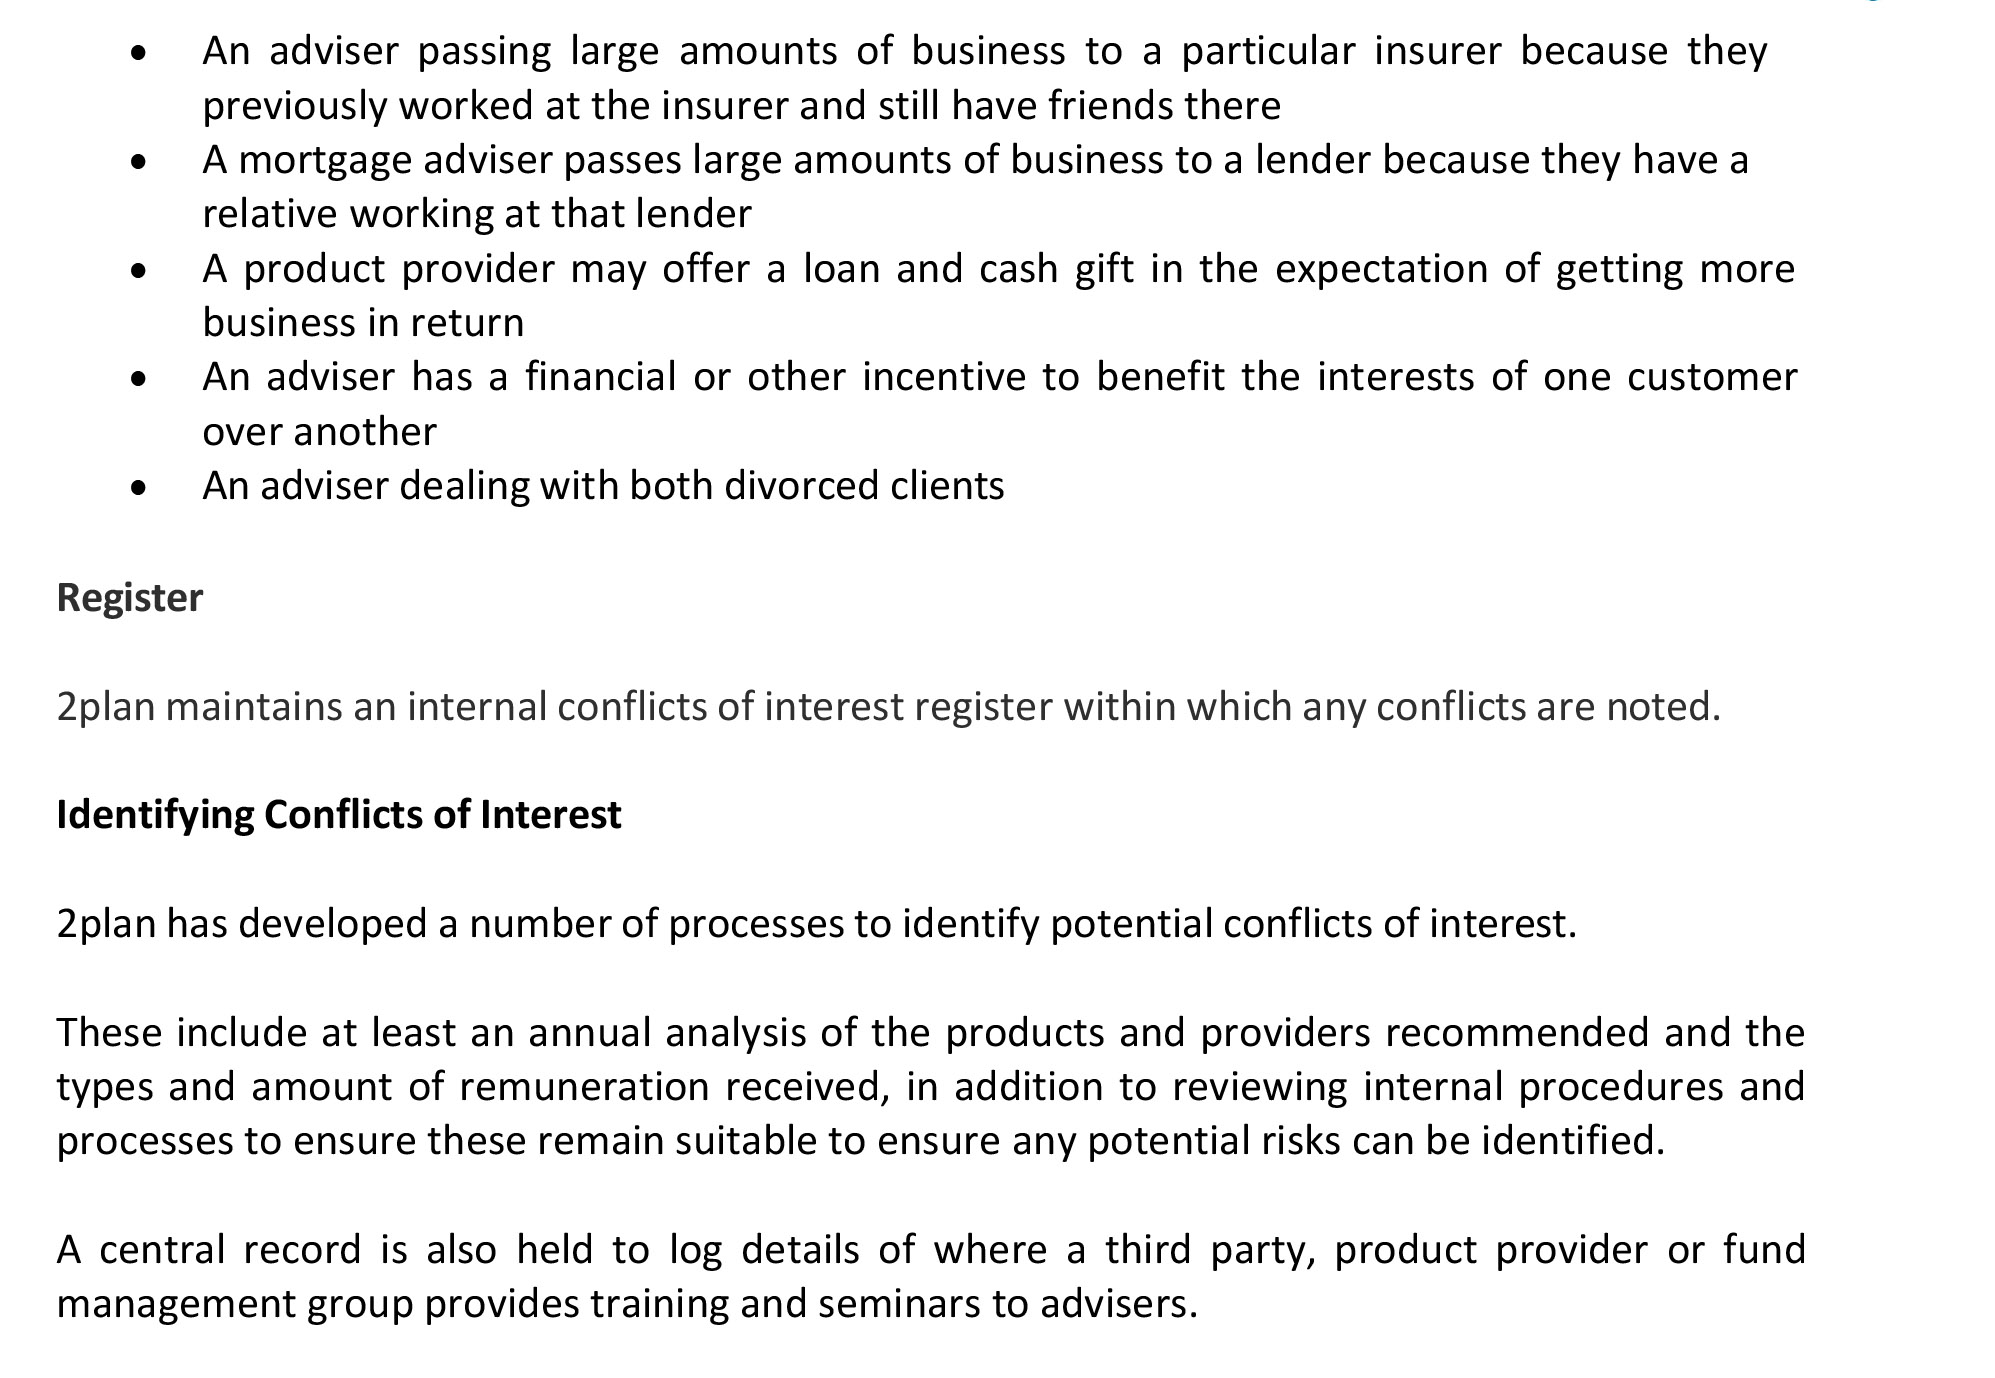 2Plan Conflicts of interest Policy